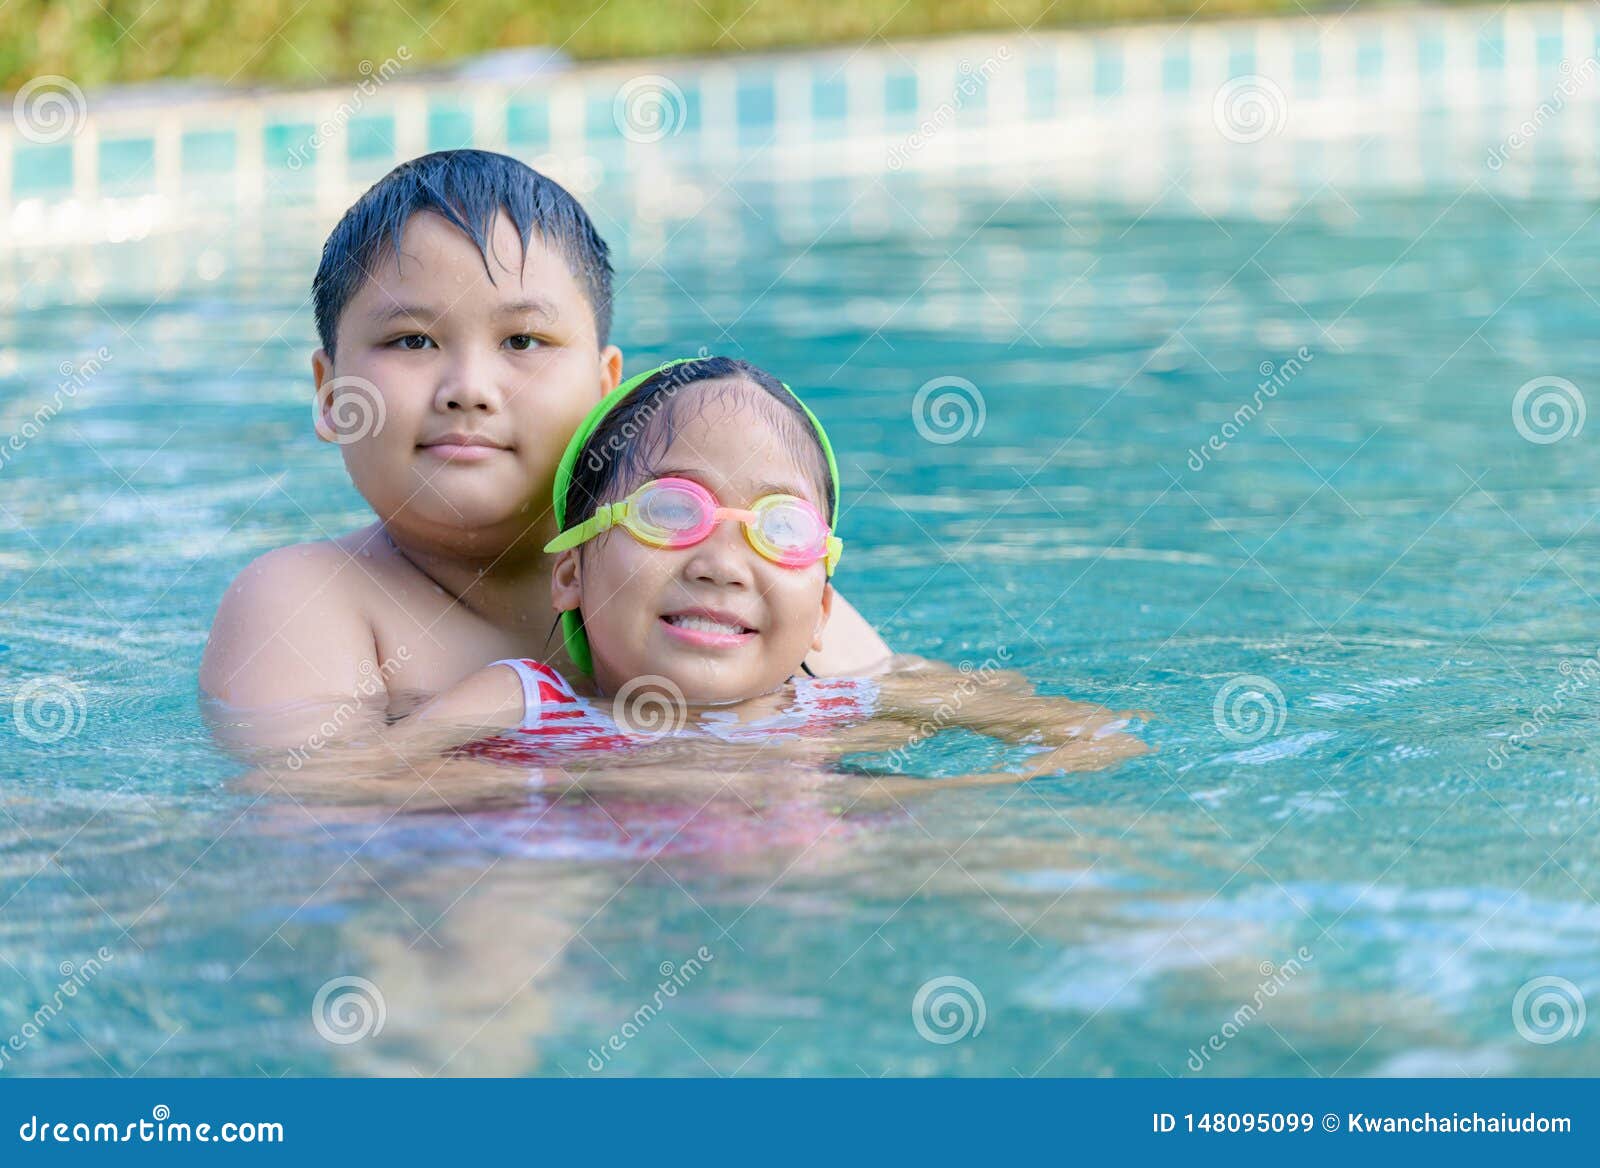 Young Brother And Little Sister Smiling At Swimming Pool 